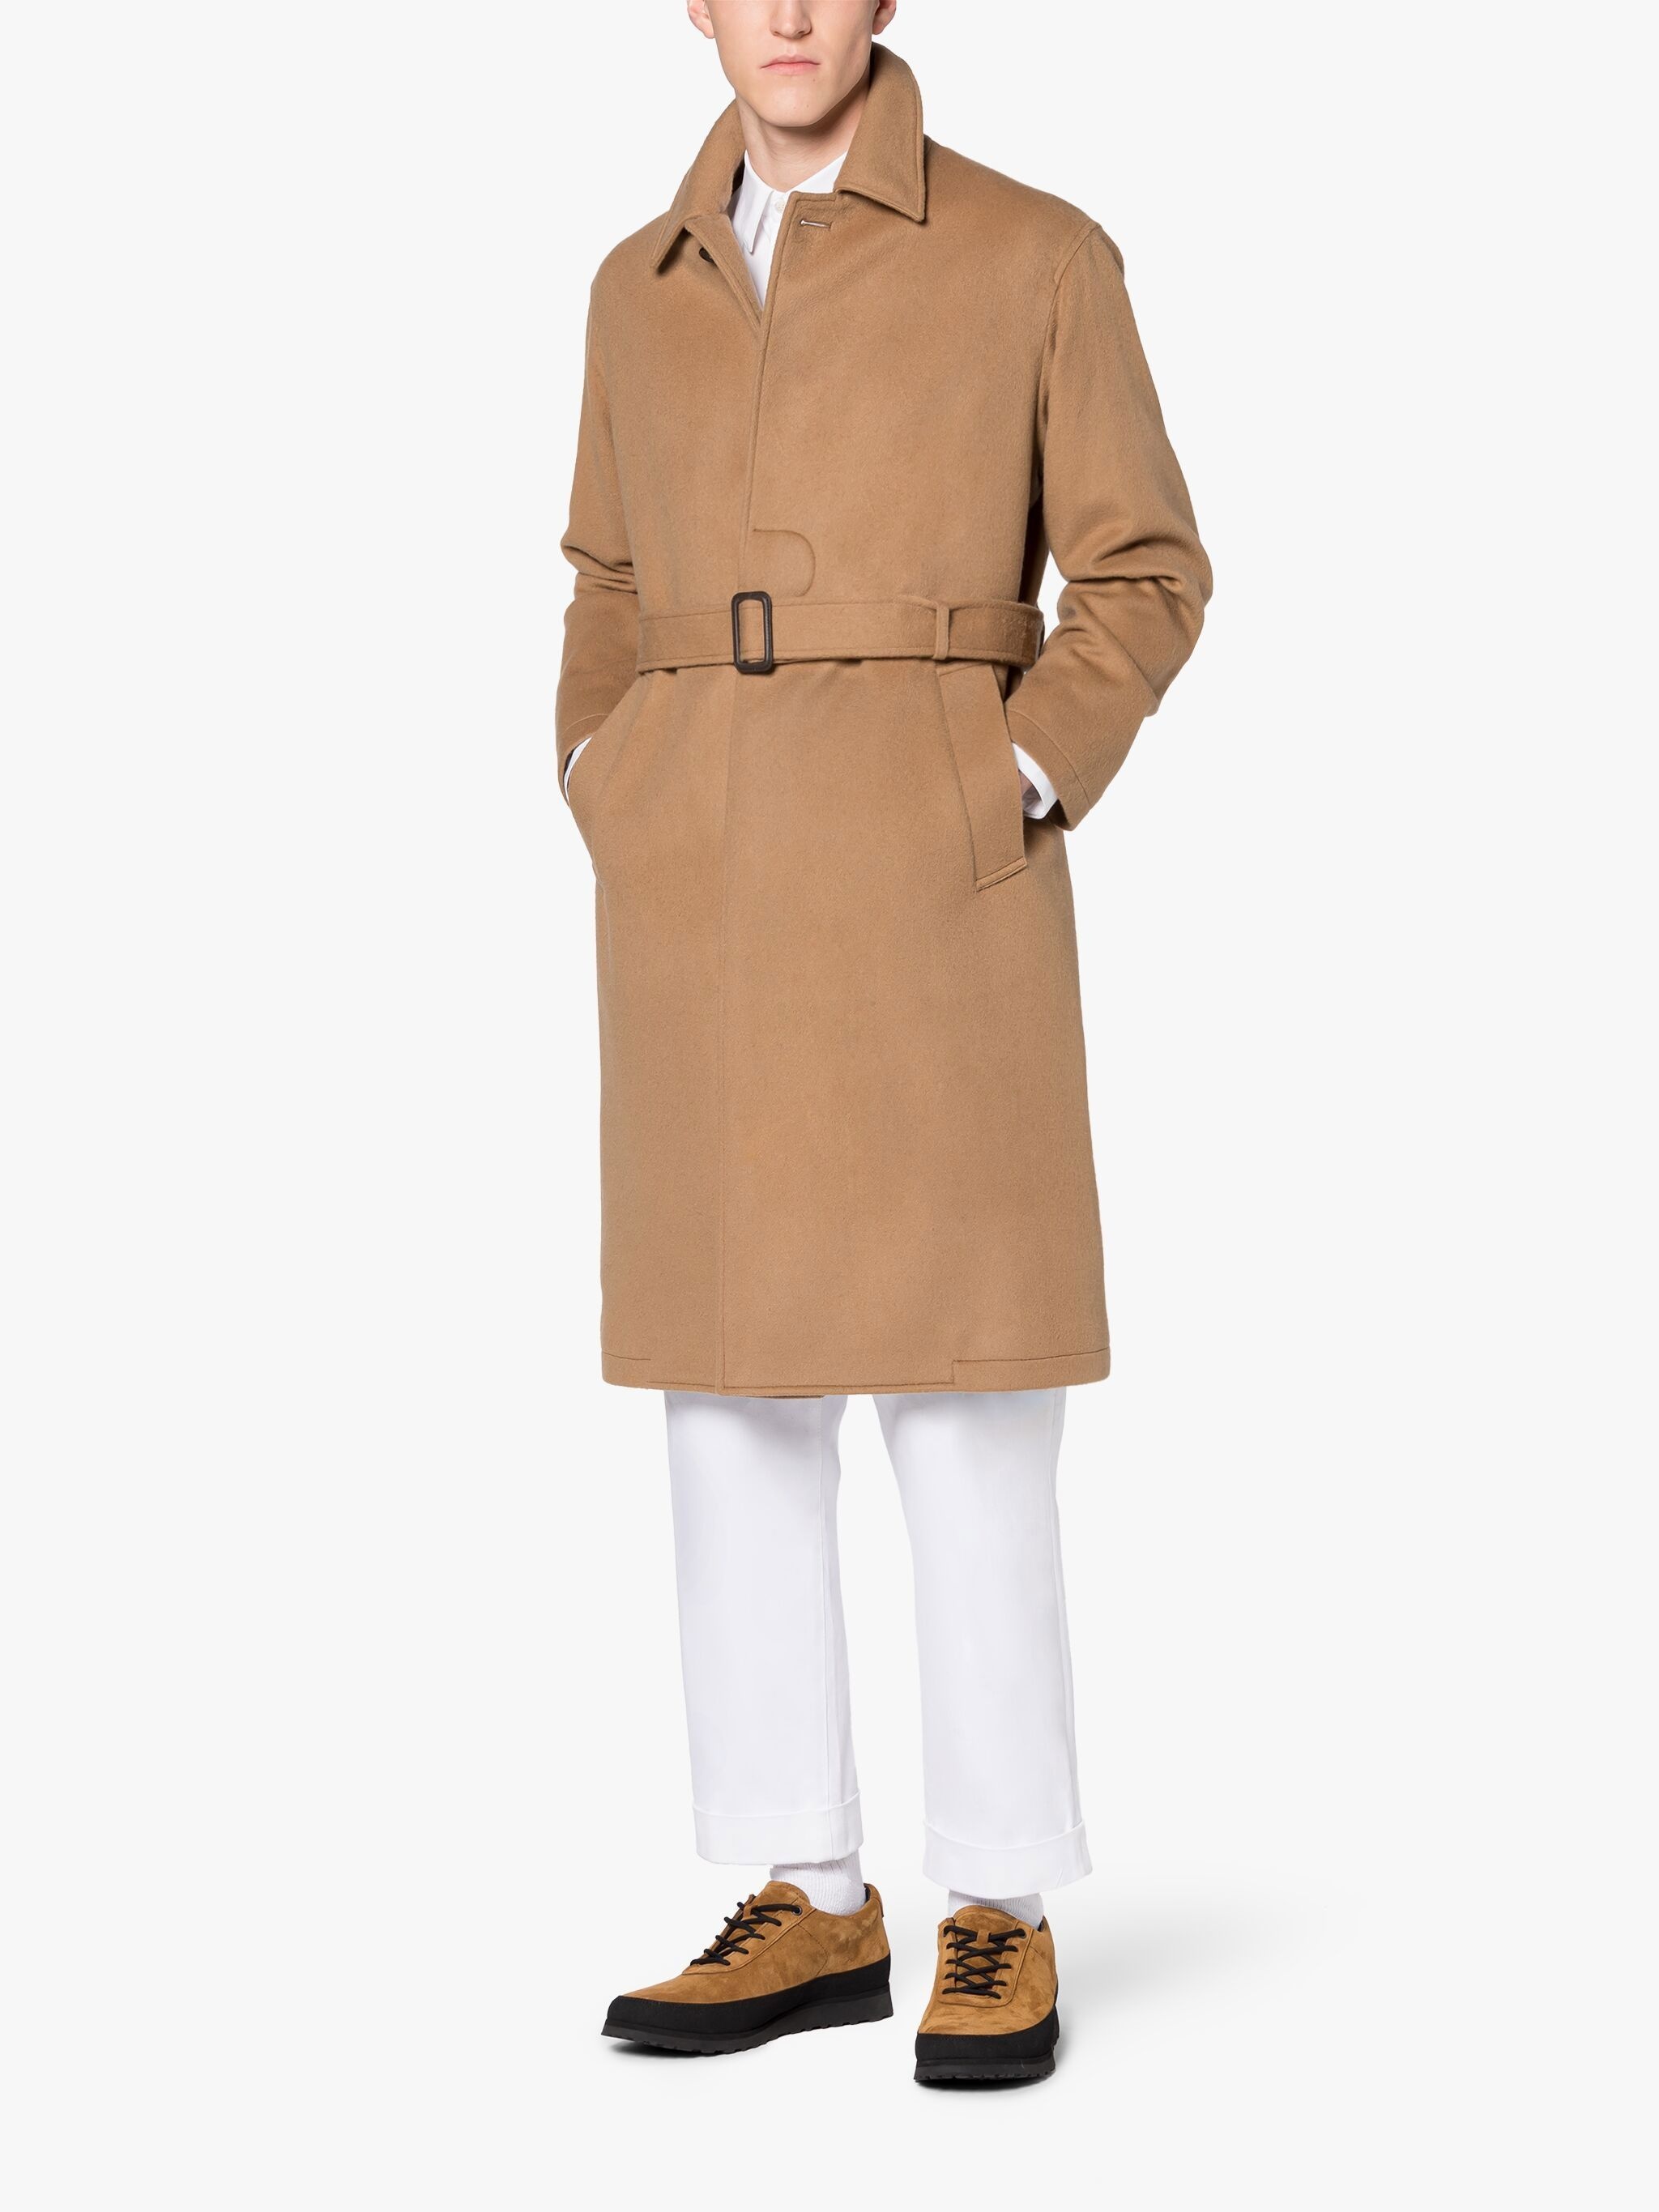 MILAN BEIGE WOOL & CASHMERE SINGLE-BREASTED TRENCH COAT - 4